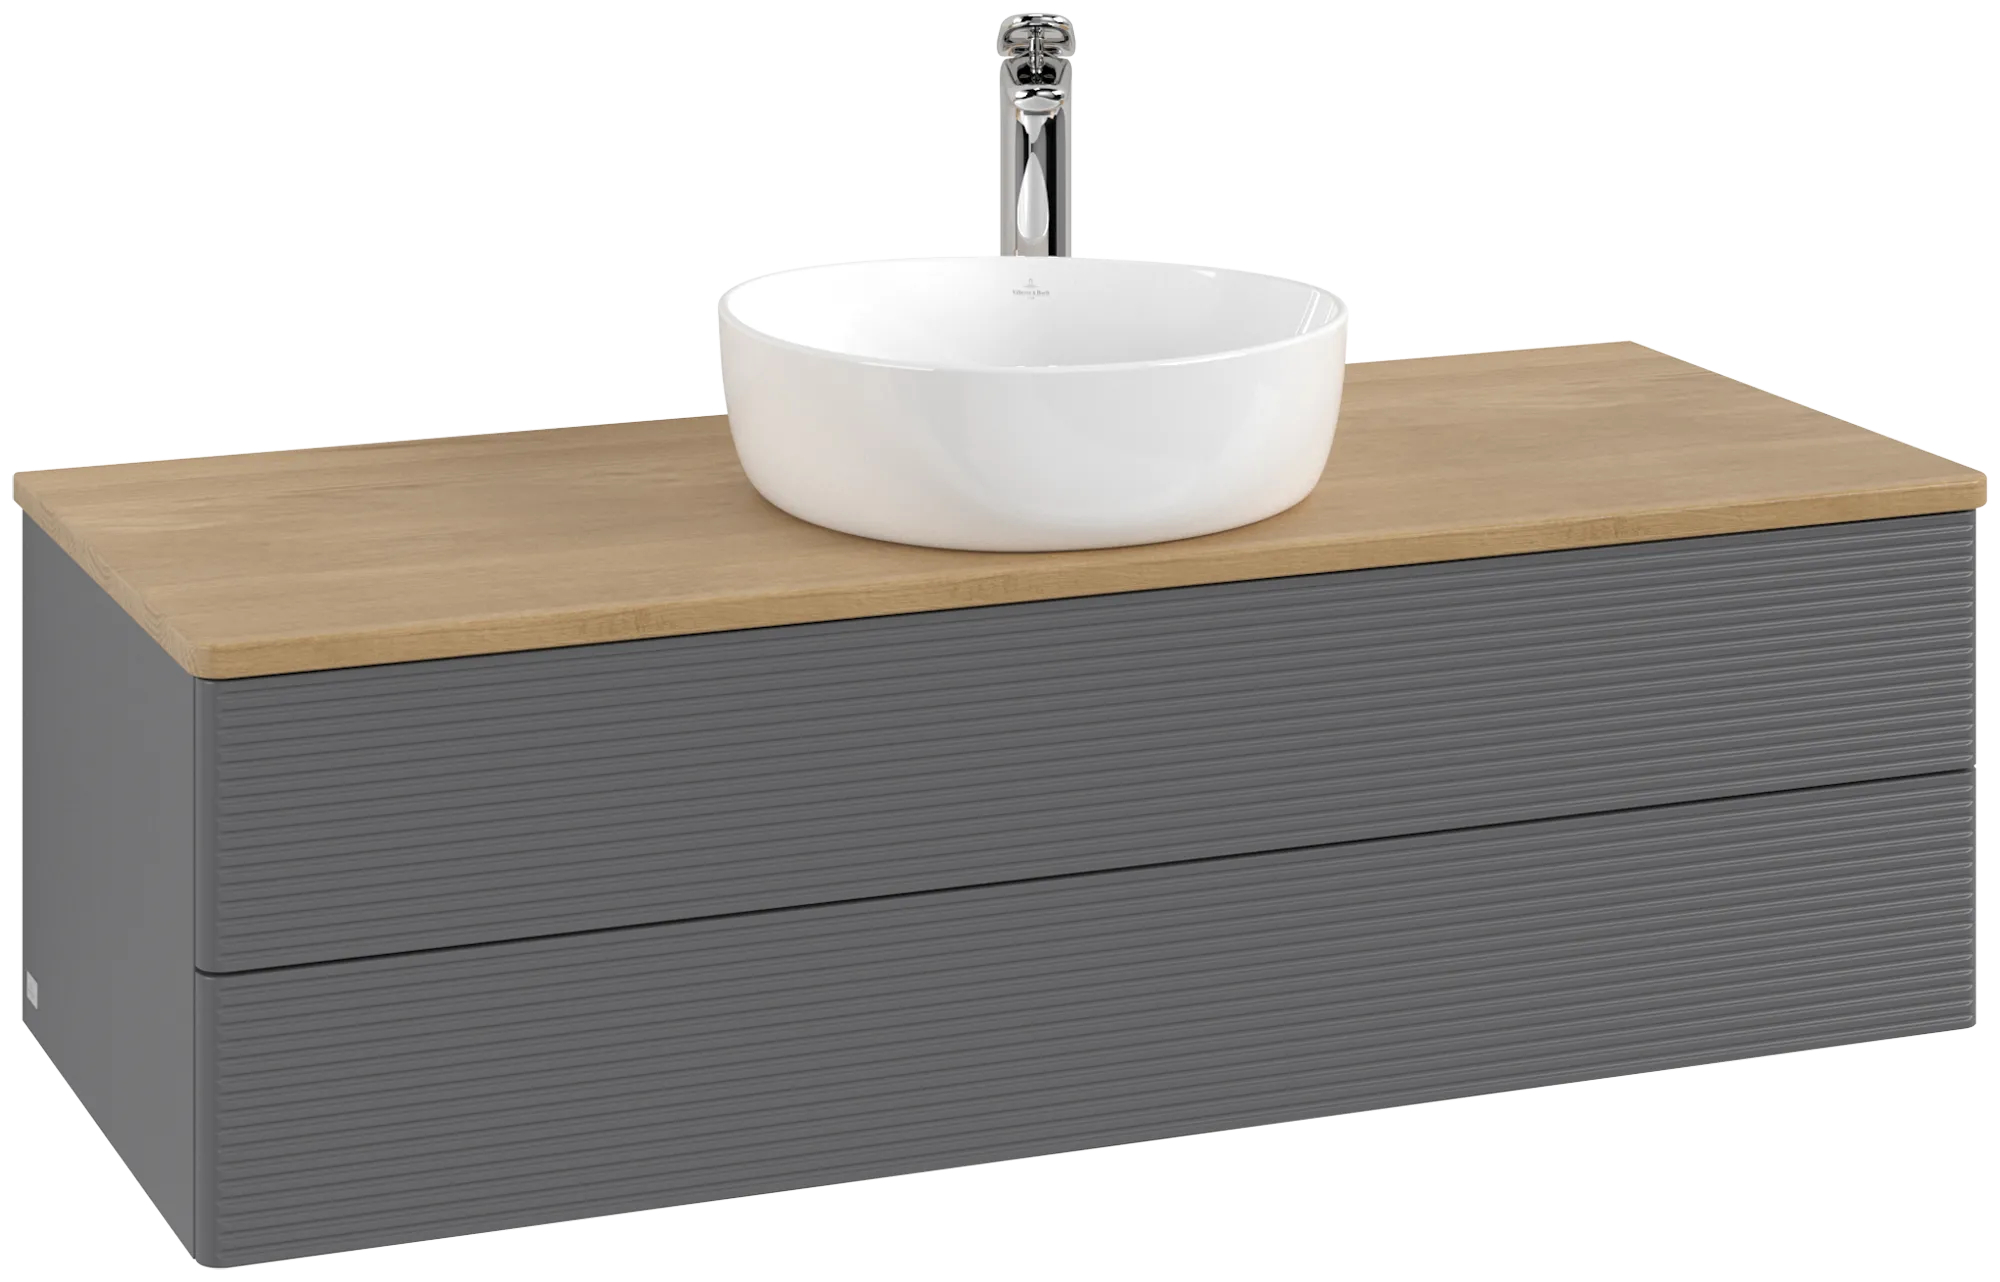 VILLEROY BOCH Antao Vanity unit, with lighting, 2 pull-out compartments, 1200 x 360 x 500 mm, Front with grain texture, Anthracite Matt Lacquer / Honey Oak #L21151GK resmi